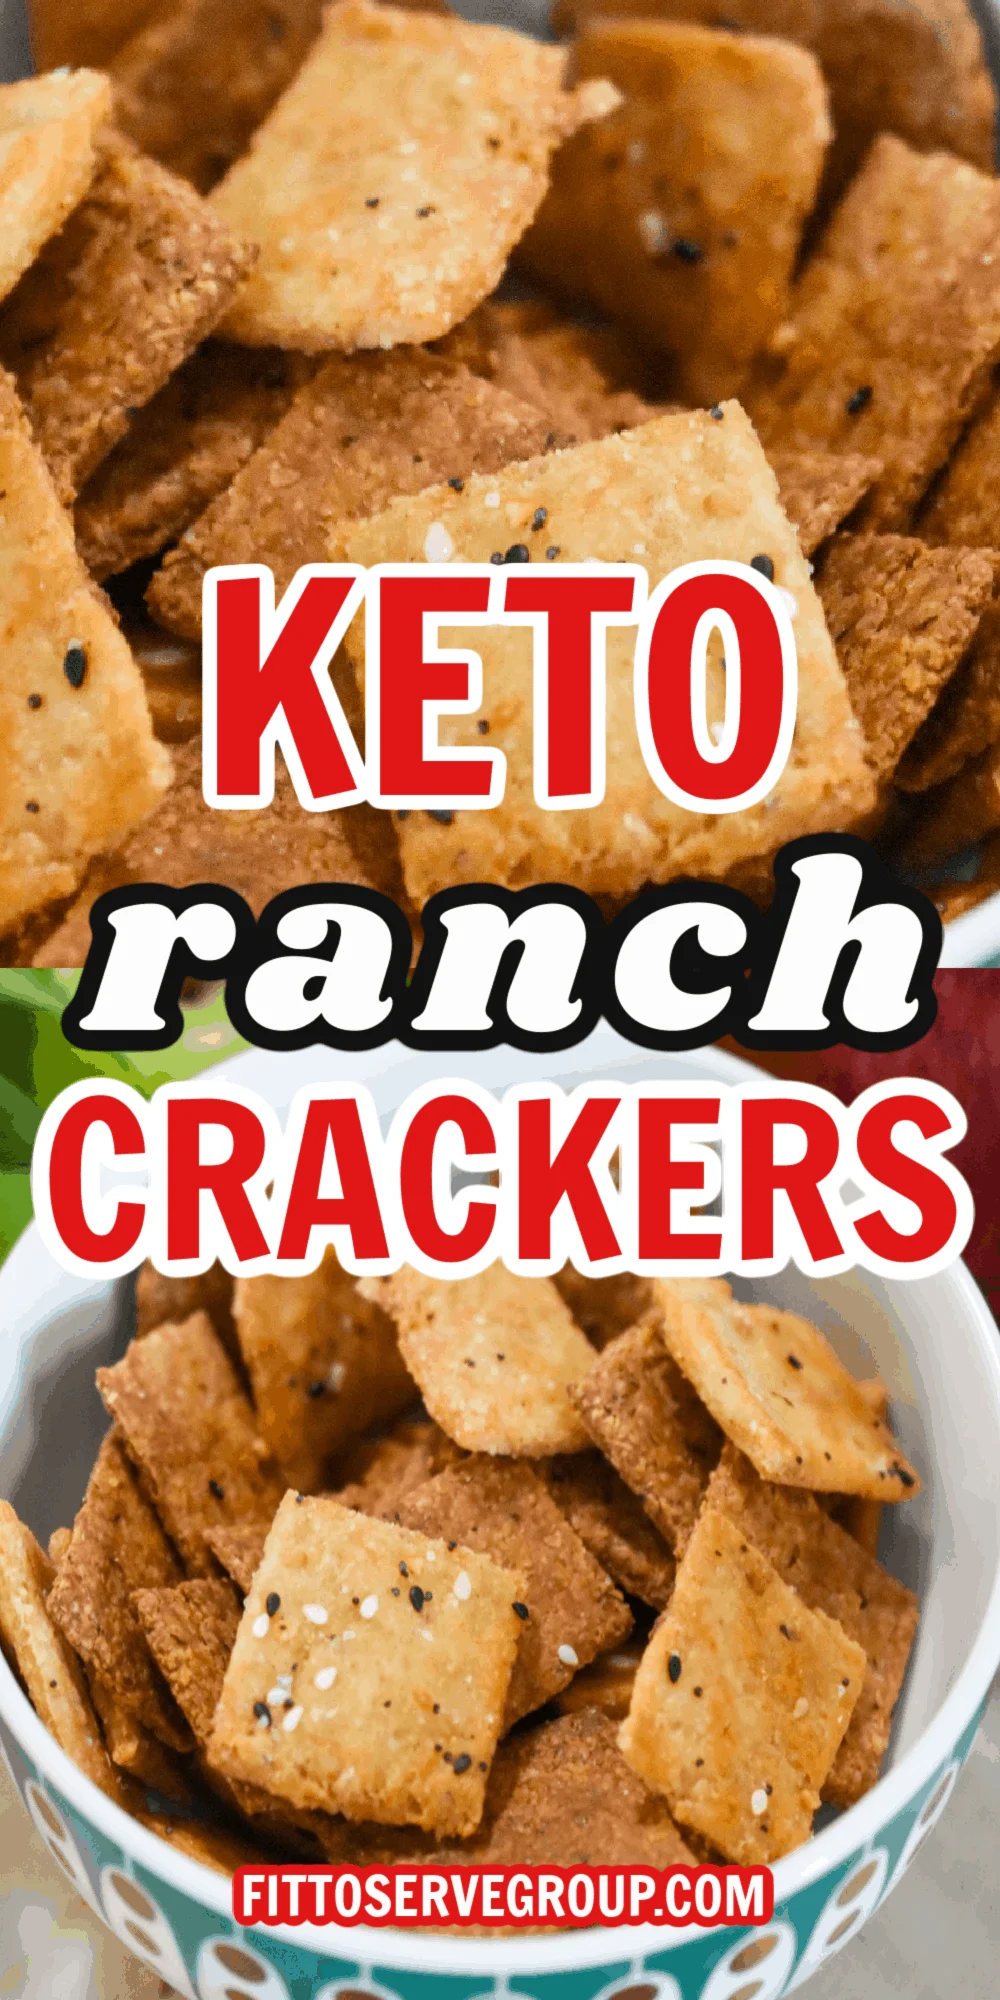 Keto ranch crackers in a small white and green bowl